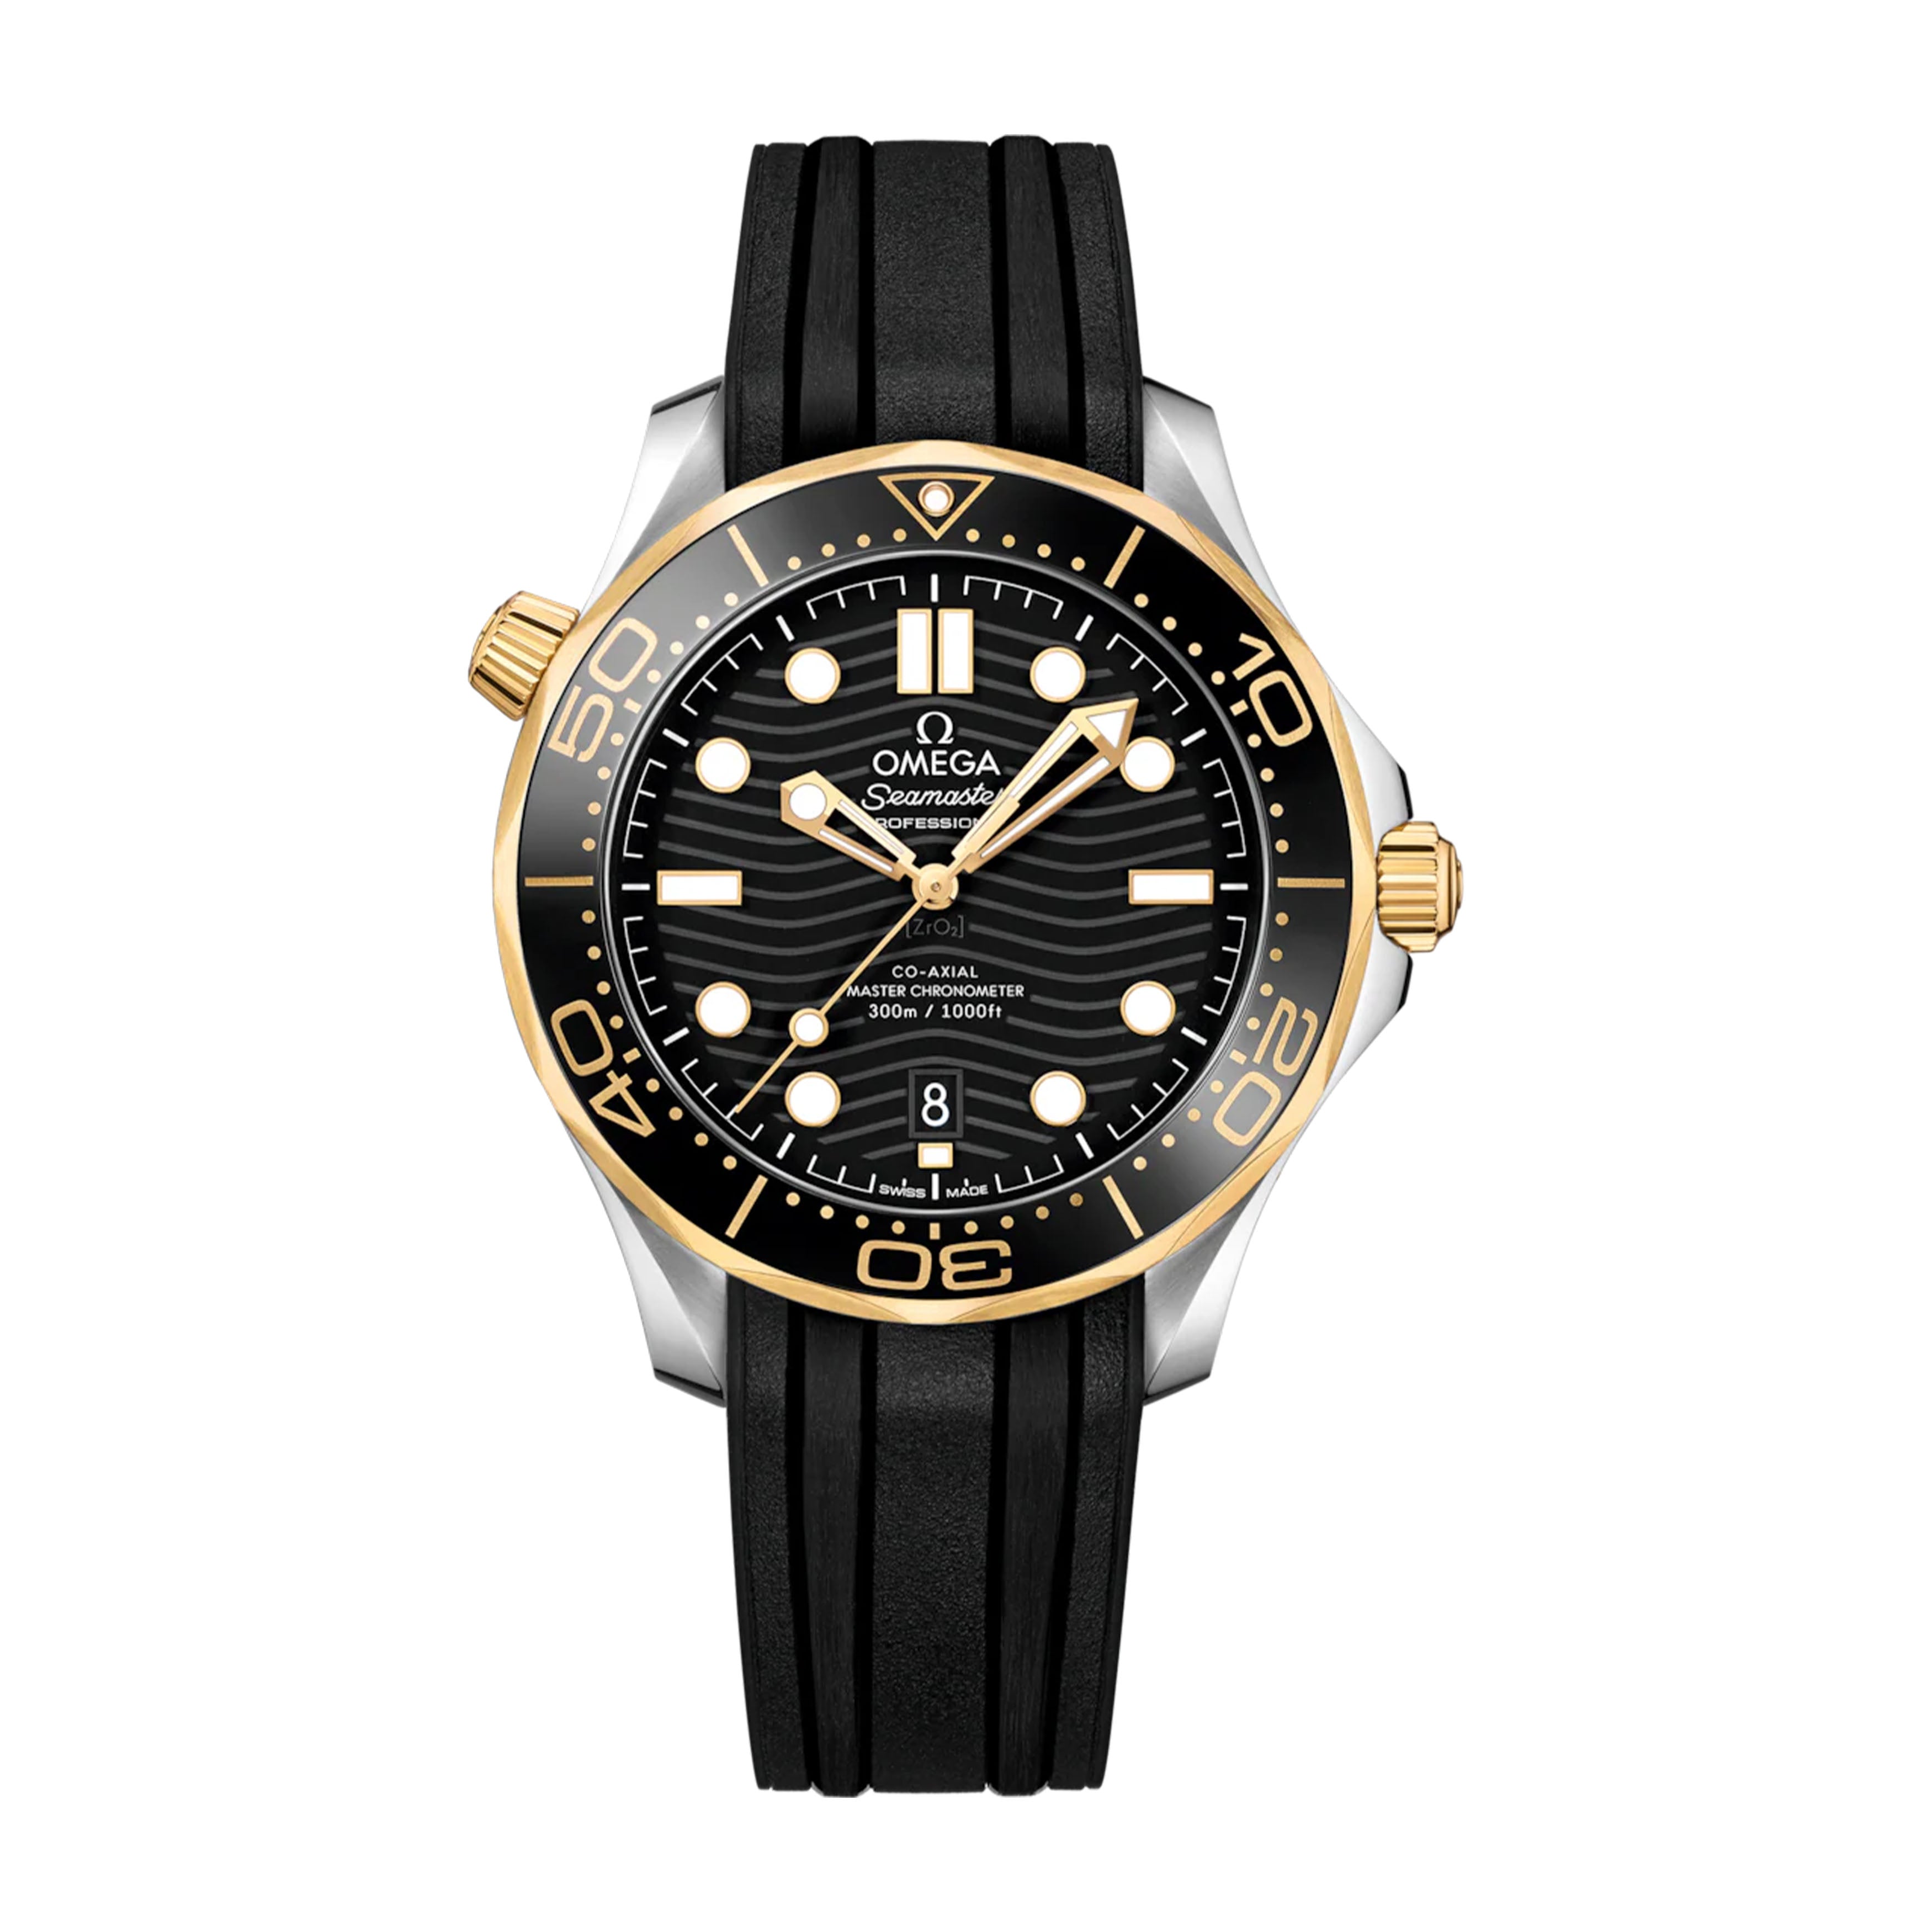 Omega Seamaster Diver 300m Co-Axial Watch, 42mm Black DIal, 210.22.42.20.01.001